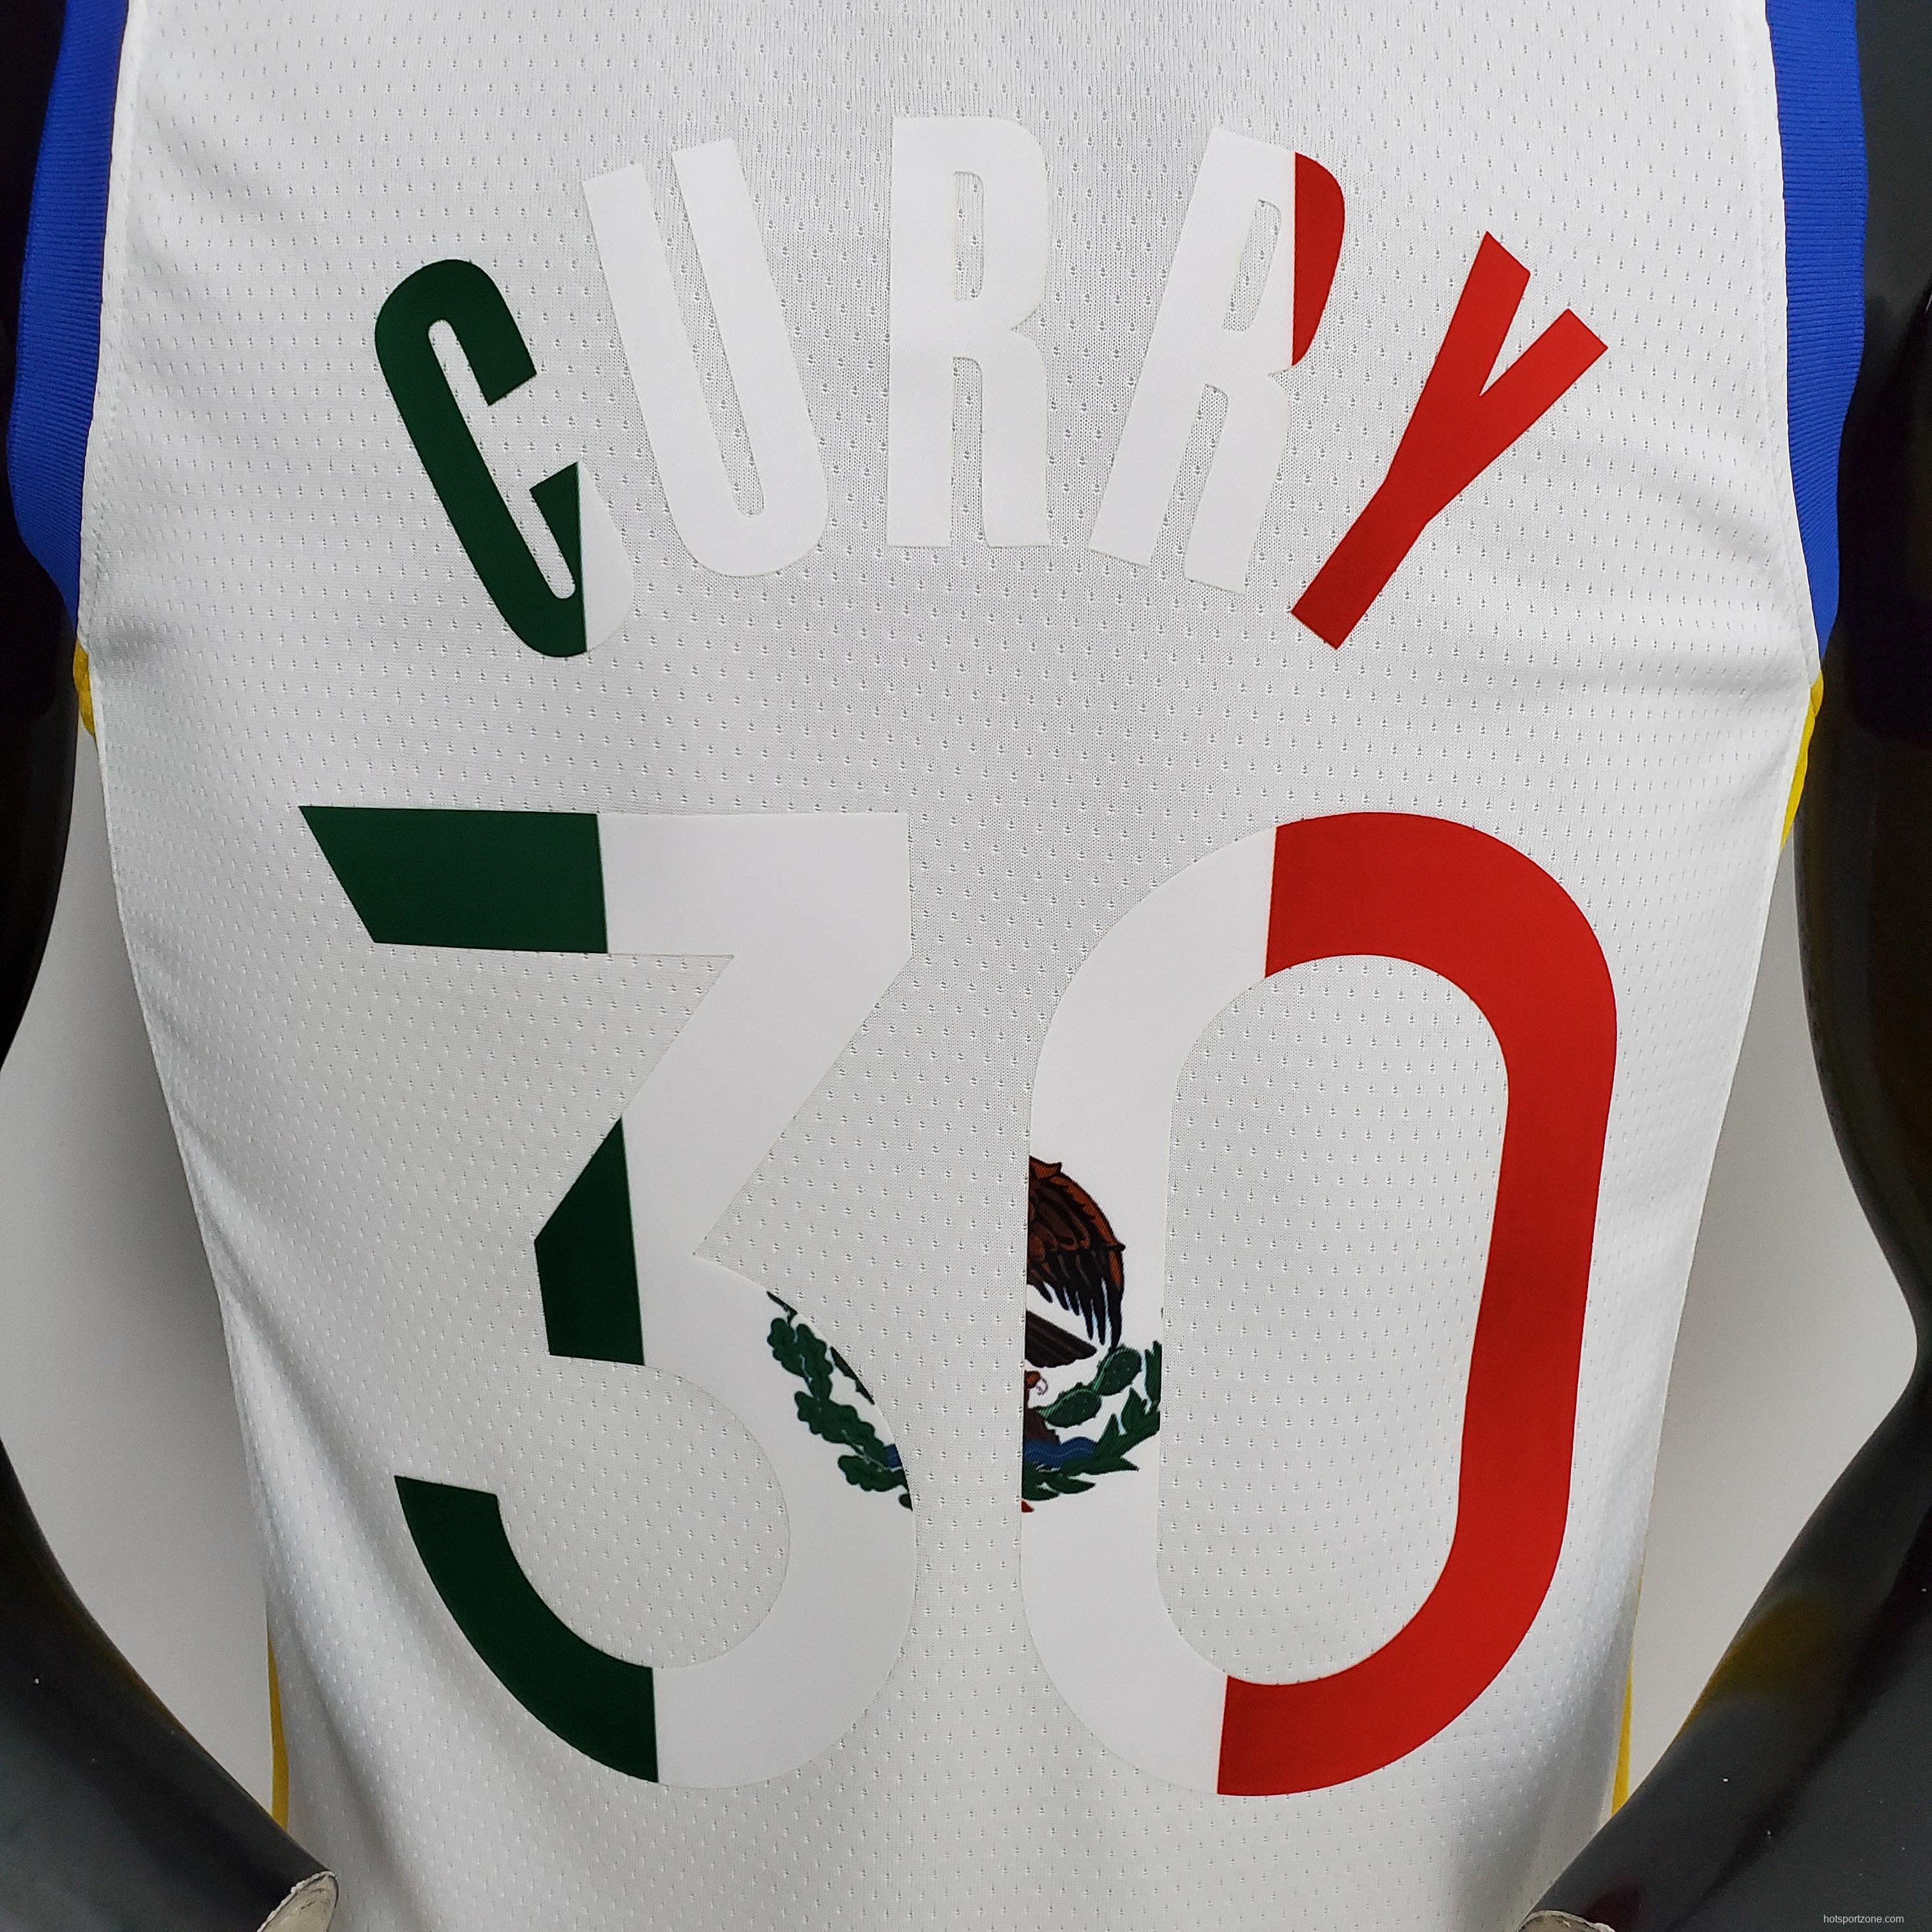 75th Anniversary Golden State Warriors Curry #30 Mexico Edition White NBA Jersey